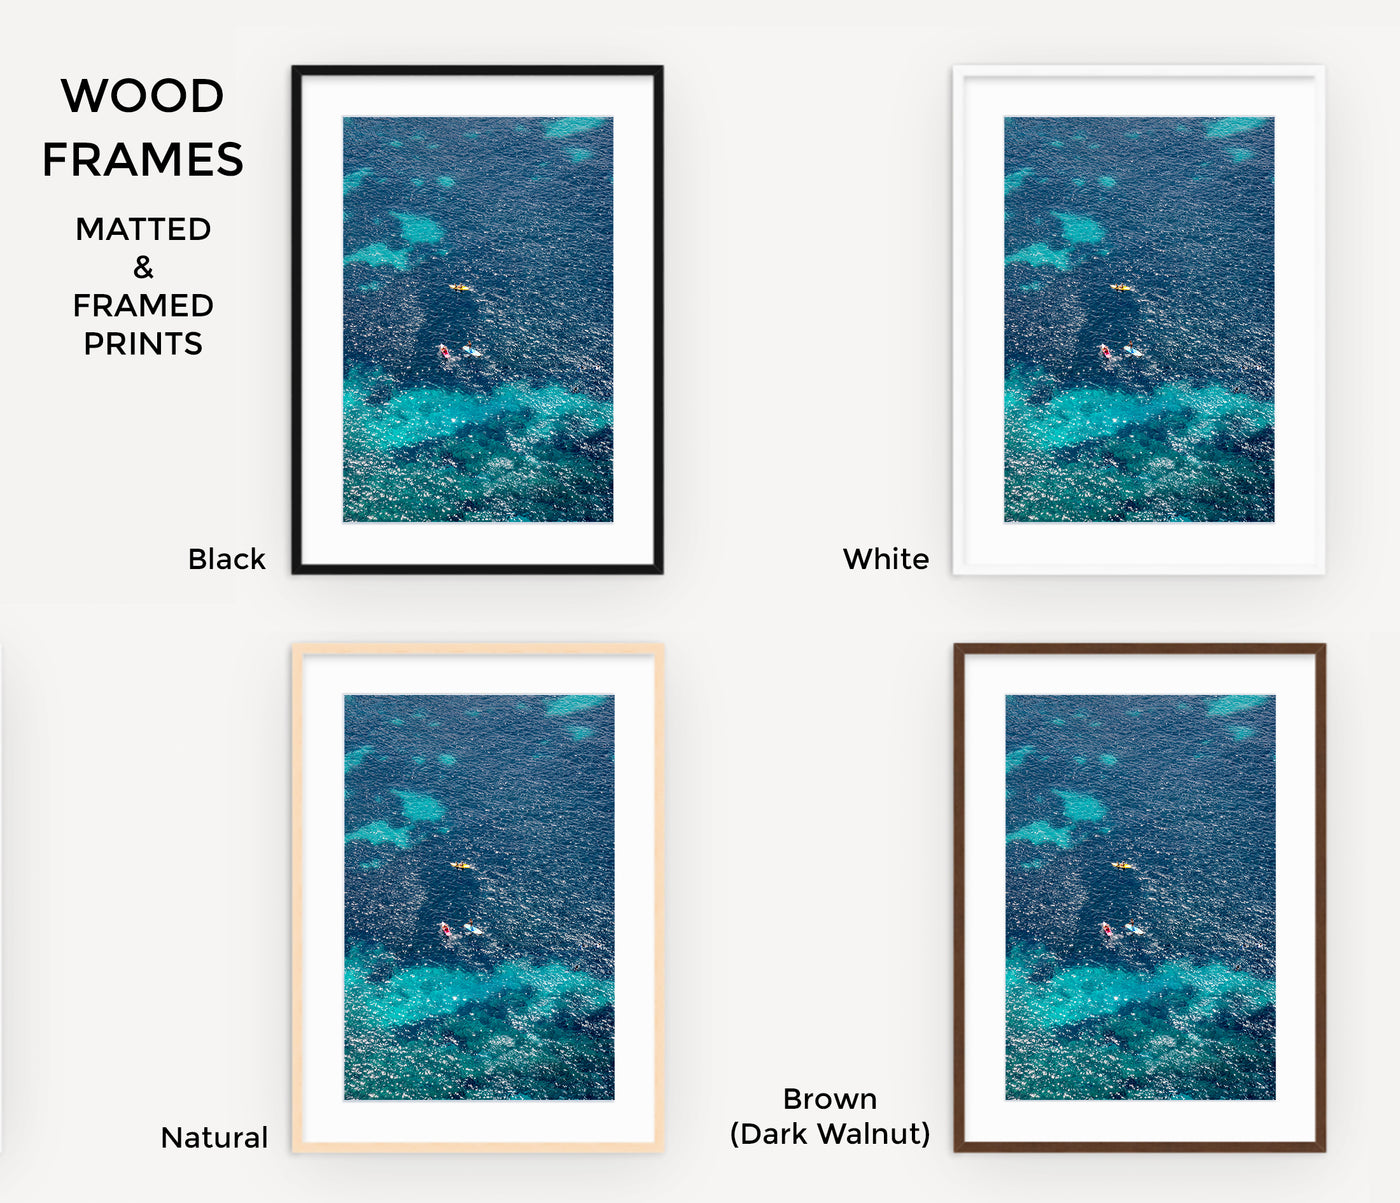 Cote d'Azur – Framed Mediterranean Sea aerial art prints by Cattie Coyle Photography